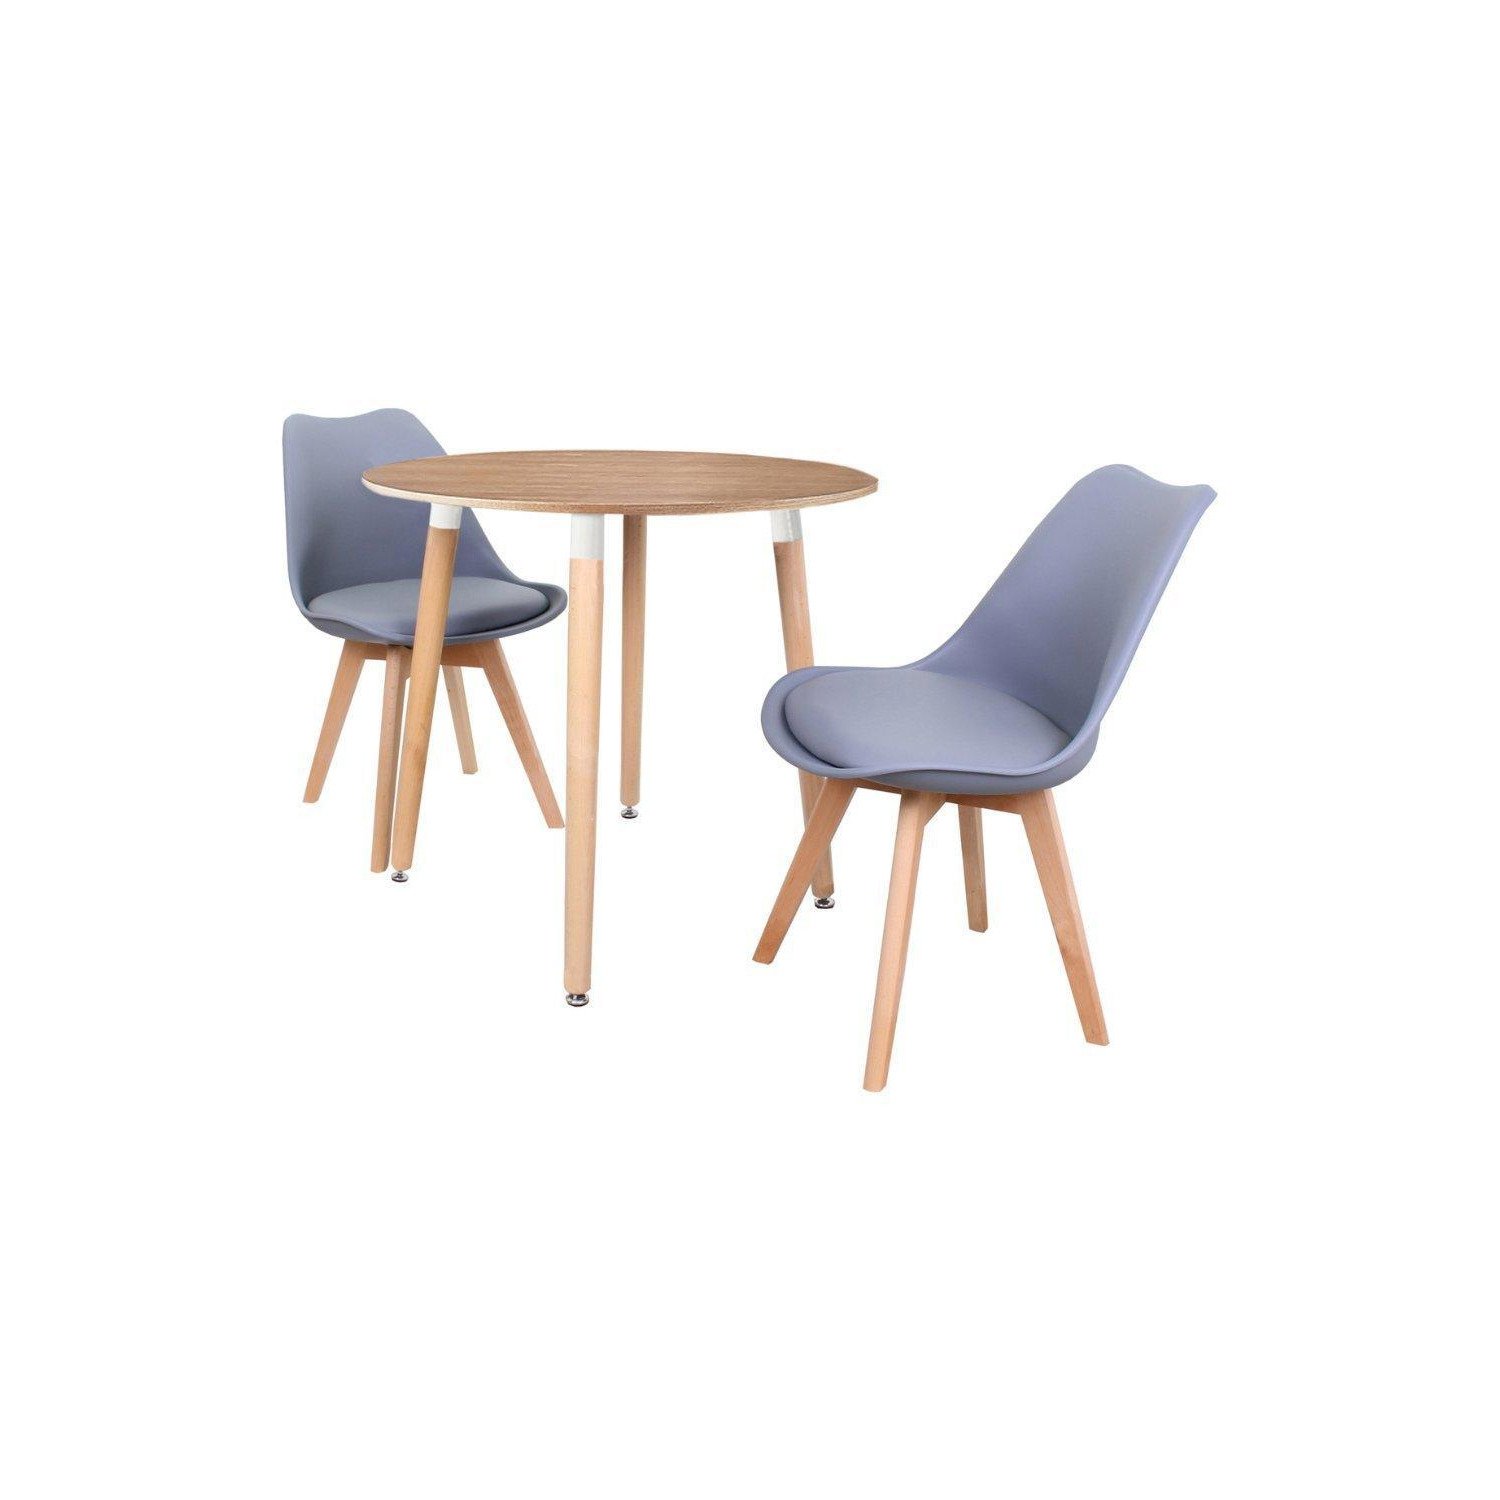 'Round Lorenzo' Dining Set with a Table and Chairs Set of 2 - image 1